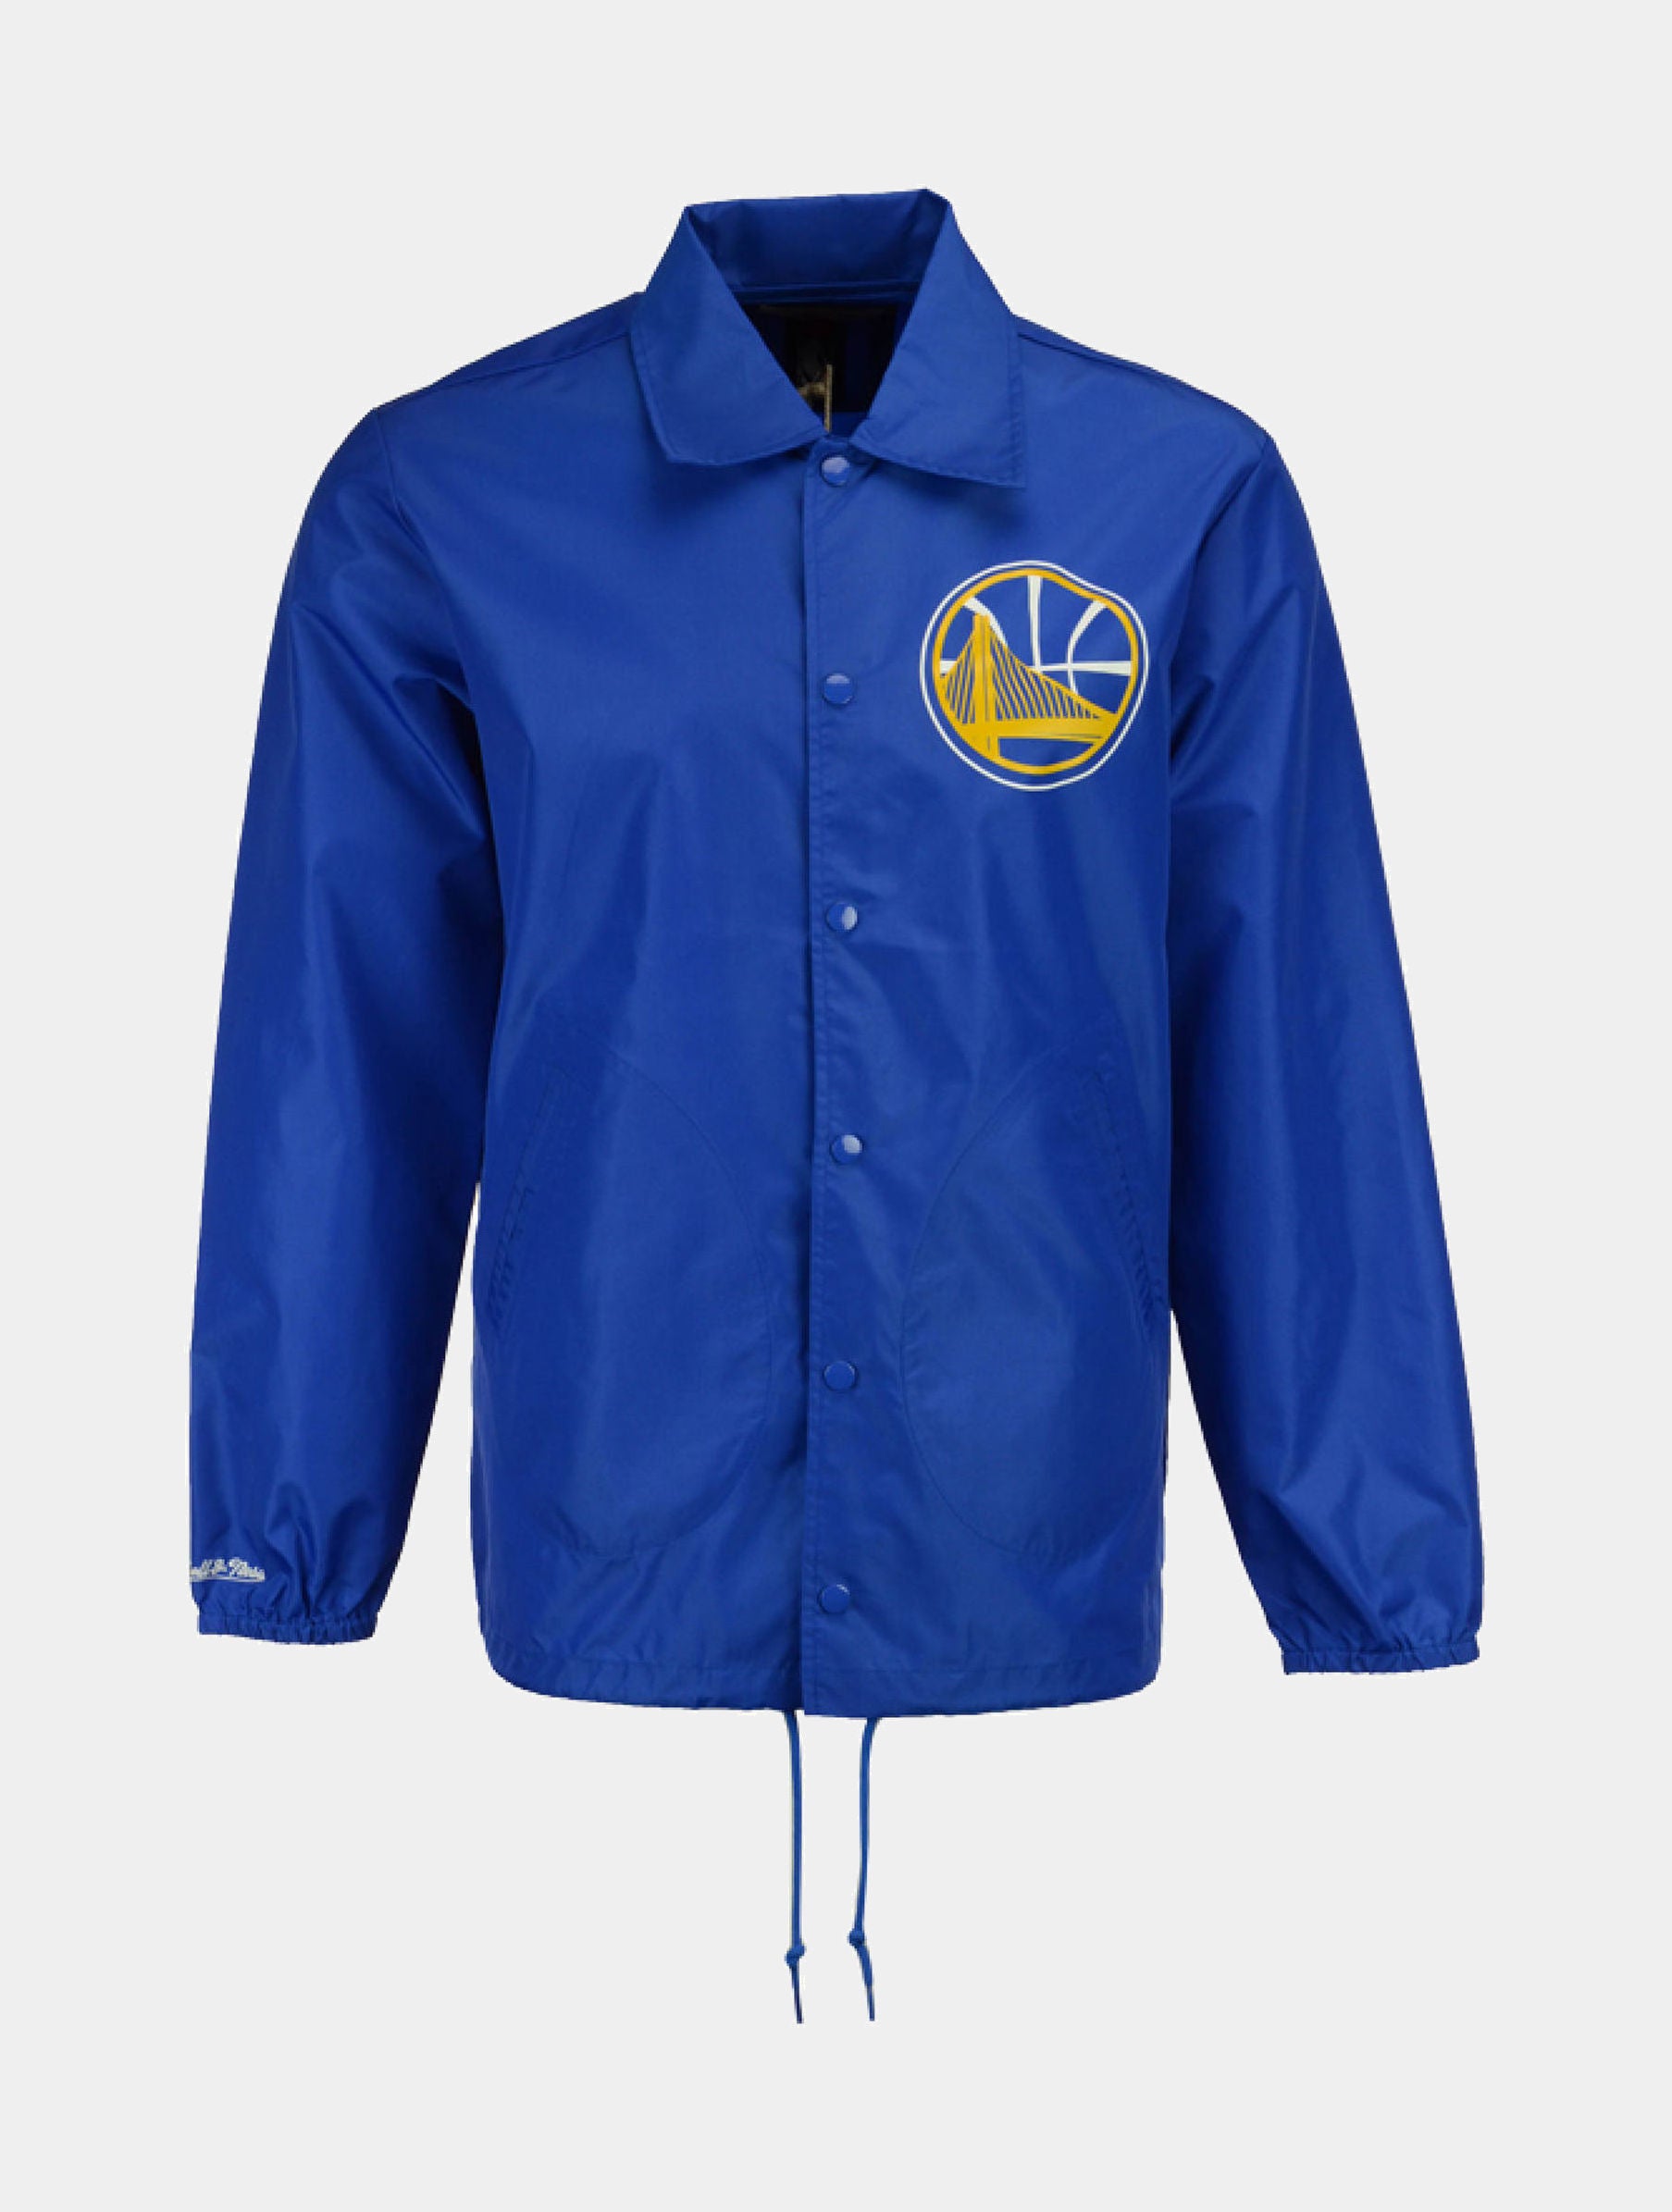 Mitchell & Ness Golden State Warriors NBA Jackets for sale